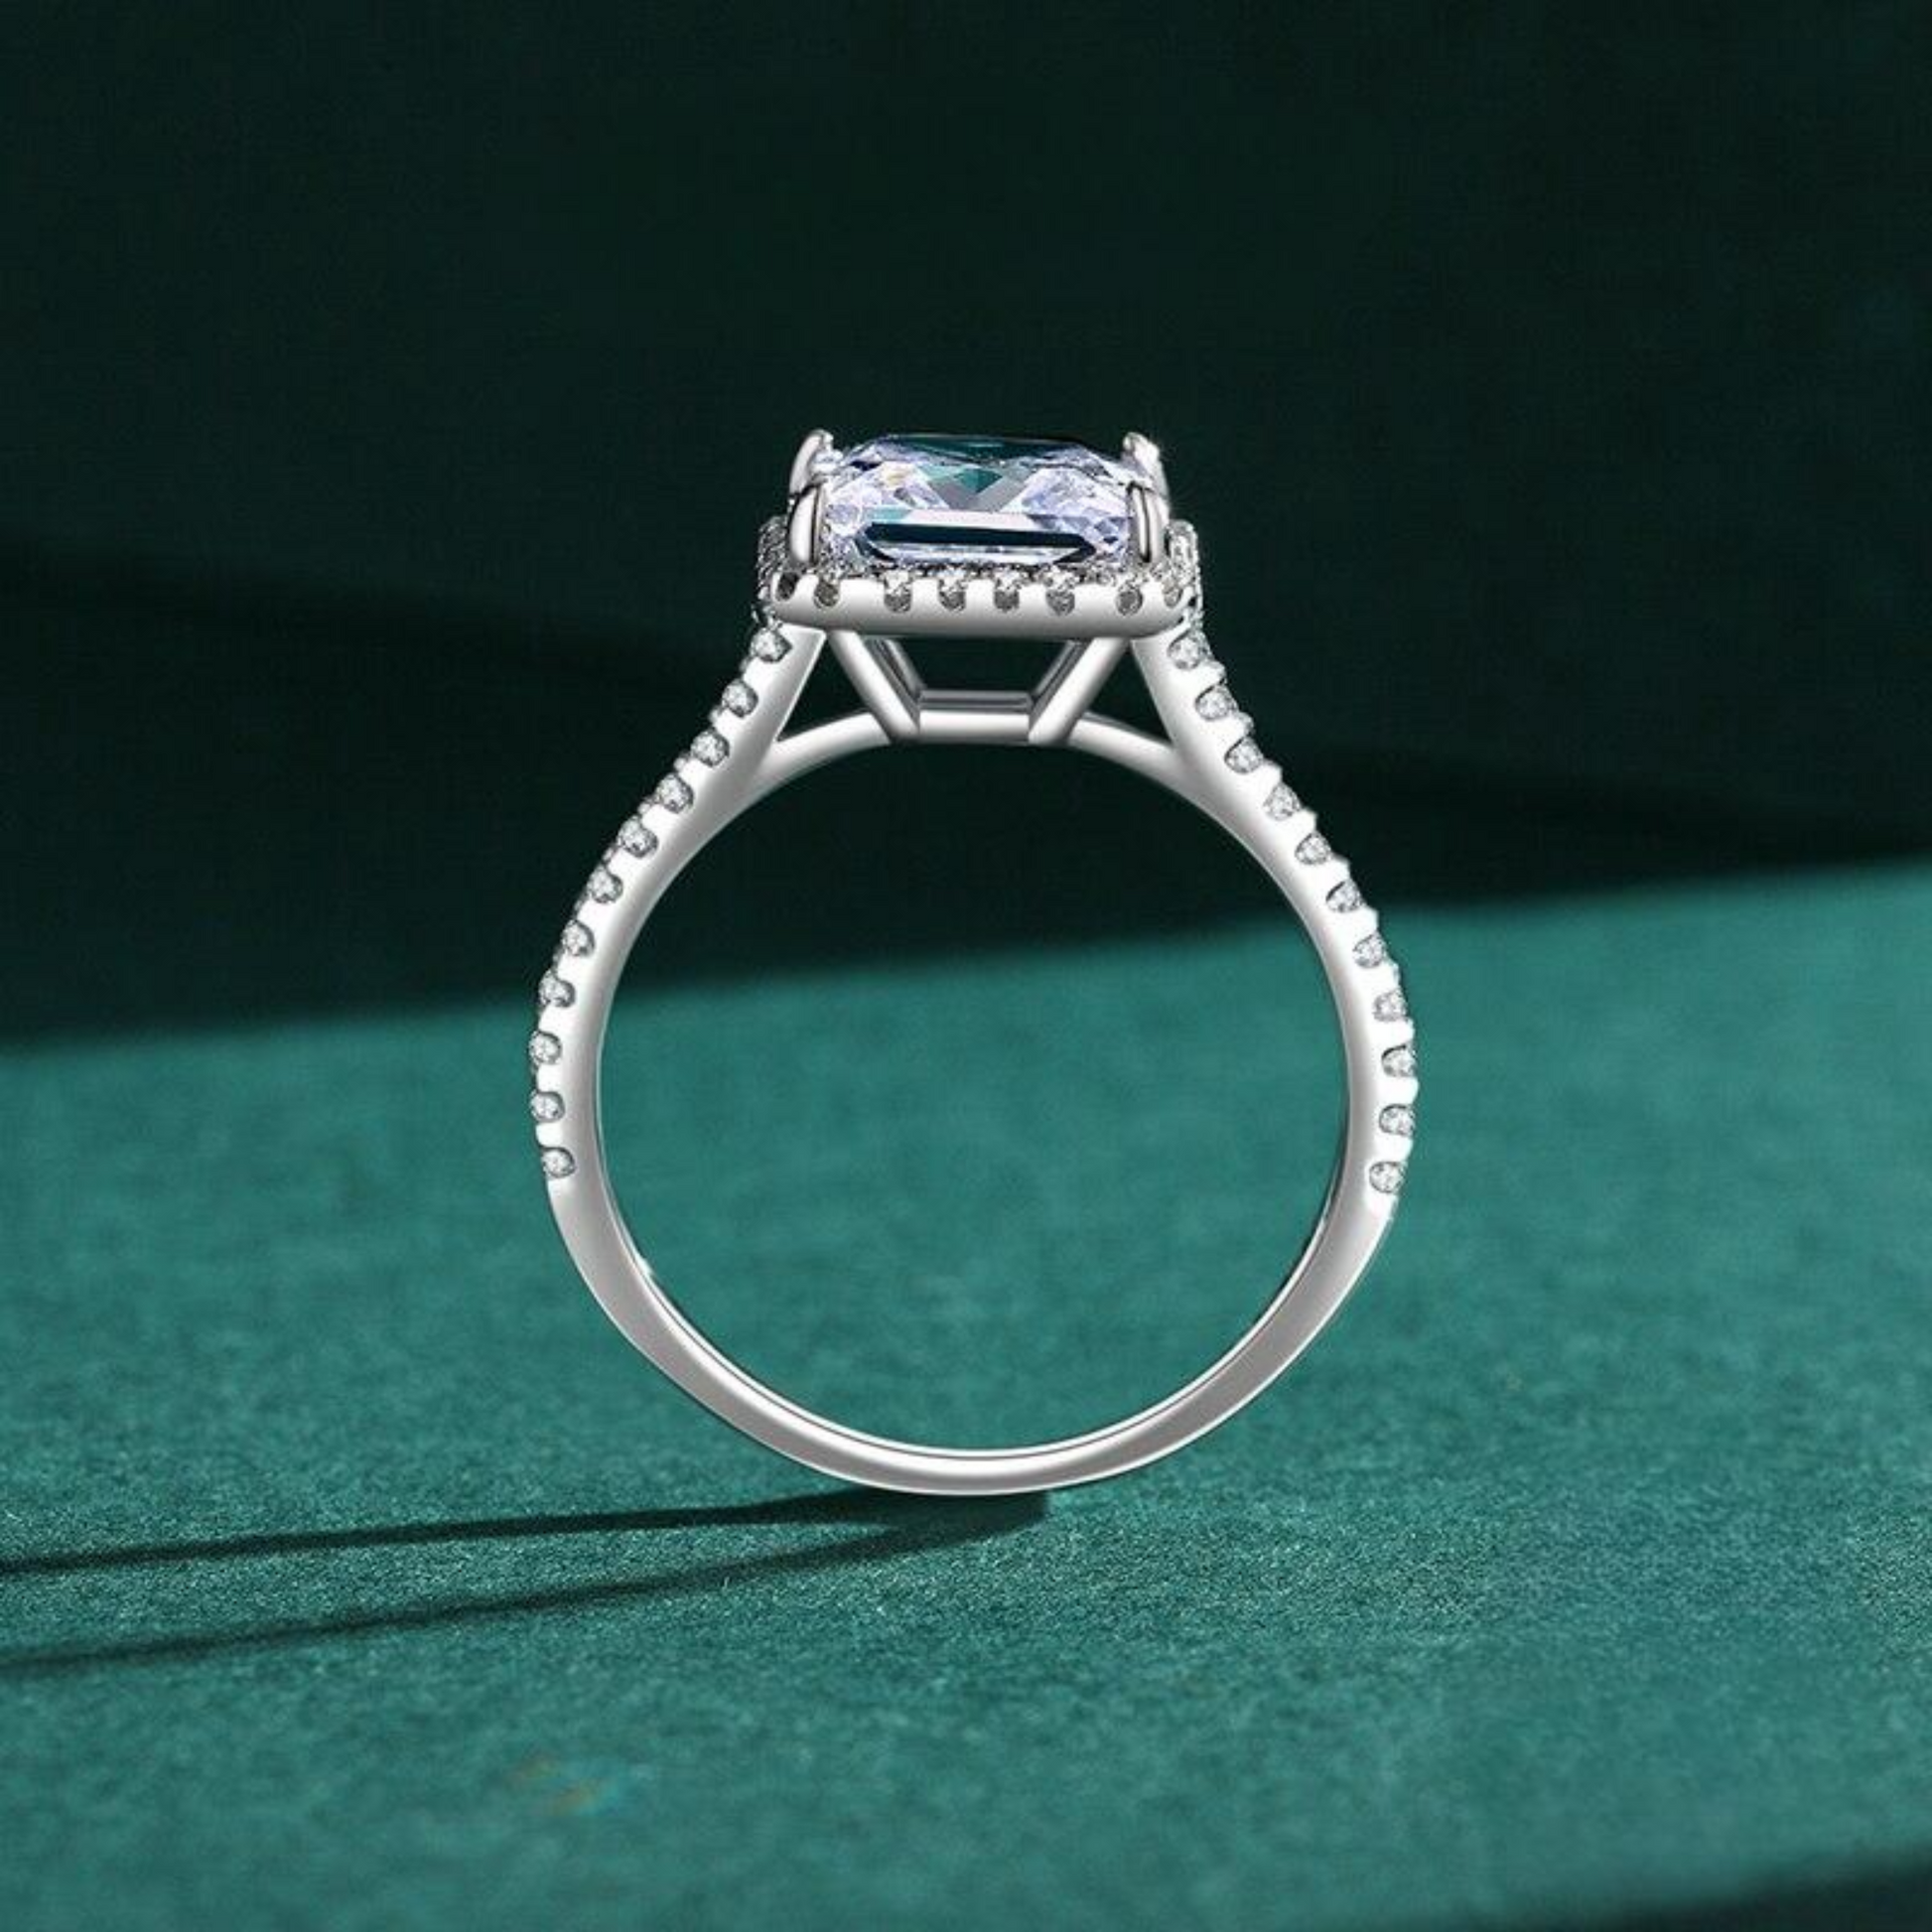 925 Sterling Silver Classic Luxury 3CT Emerald Cut Sparkling Water Drop Shape CZ Rings For Women - Romantic Wedding Jewelry